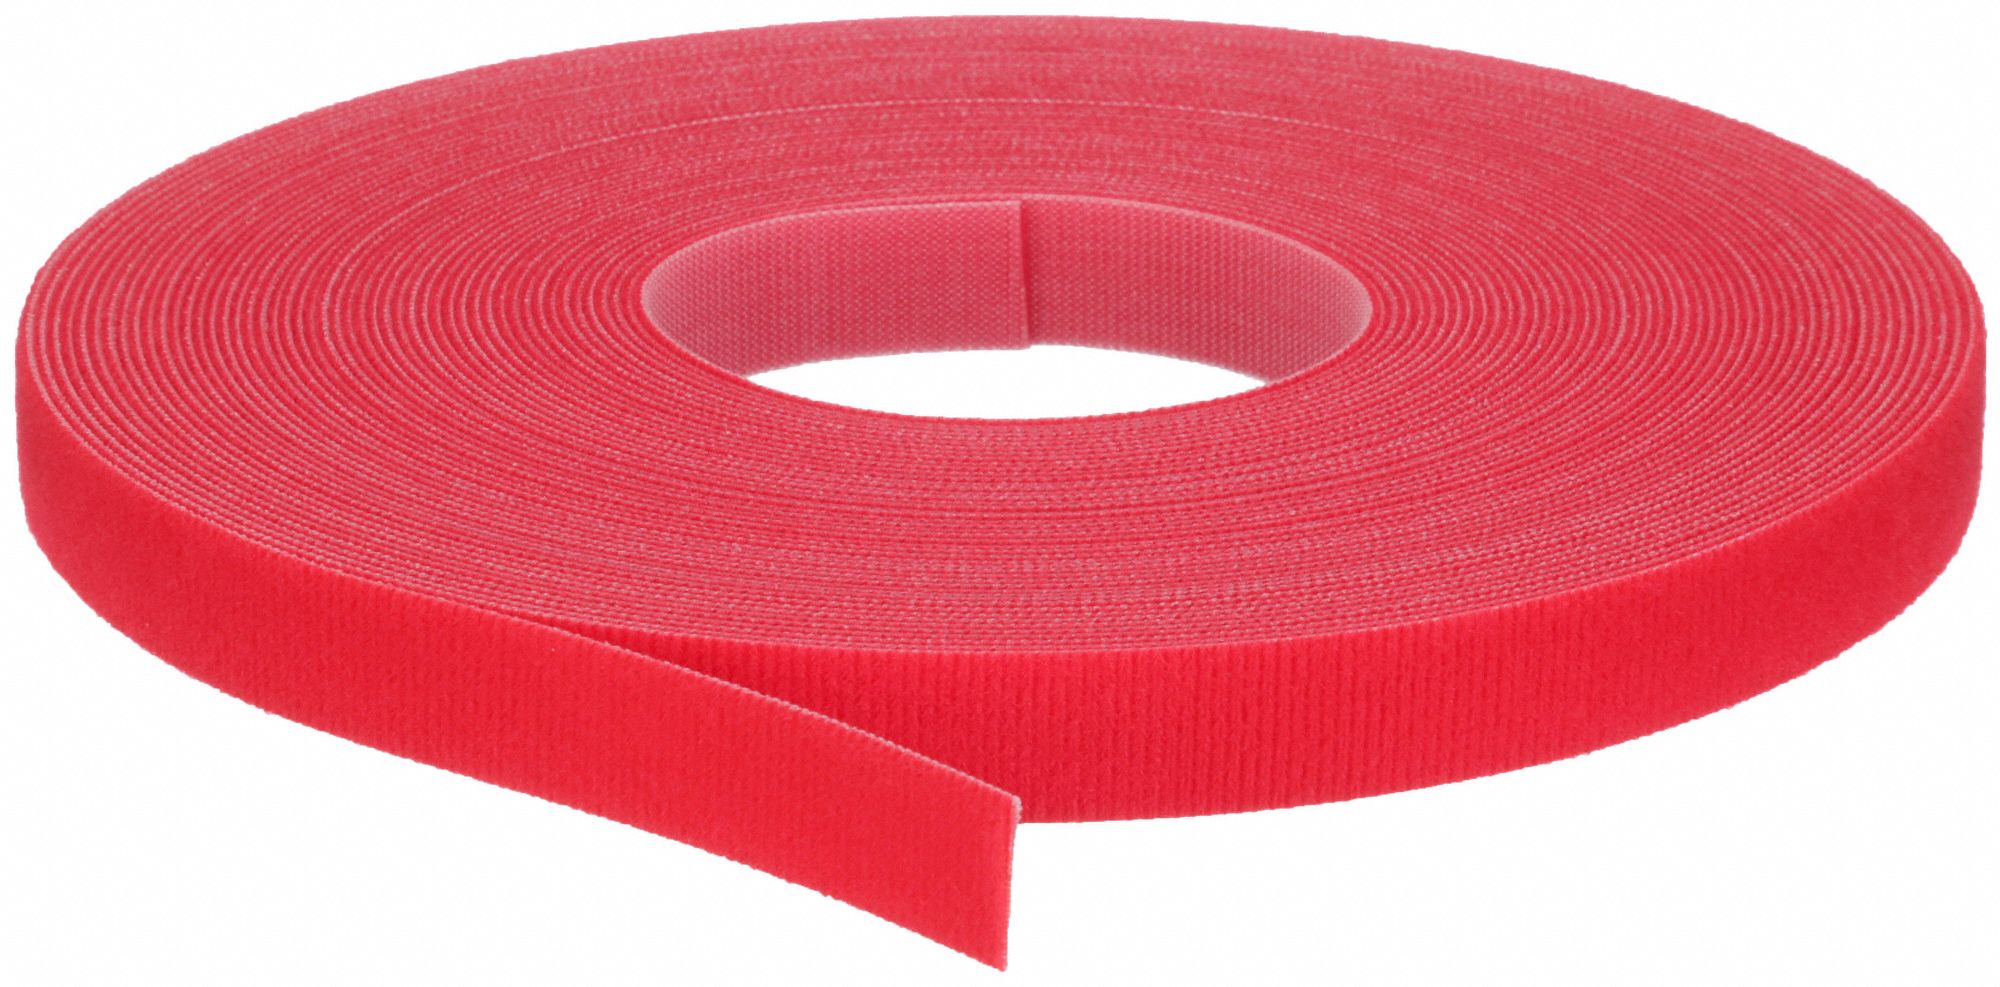 VELCRO BRAND, 75 ft Lg, 0.5 in Wd, Hook-and-Loop Cable Tie Roll